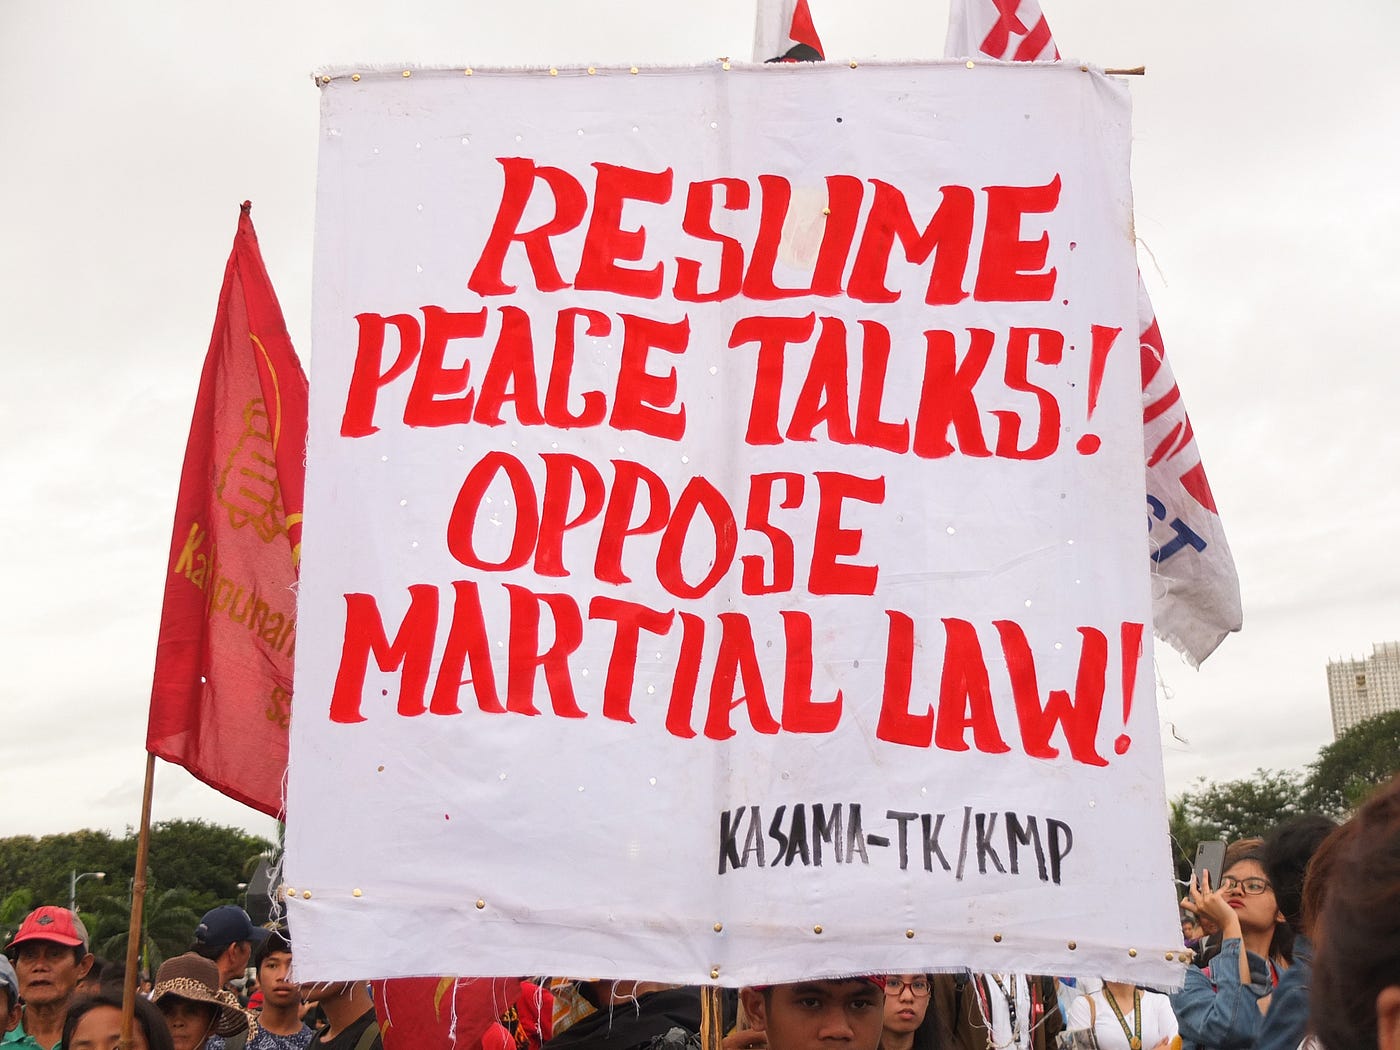 A large banner with a slogan ‘Resume peace talks! Oppose martial law!’ is held aloft during a demonstration.